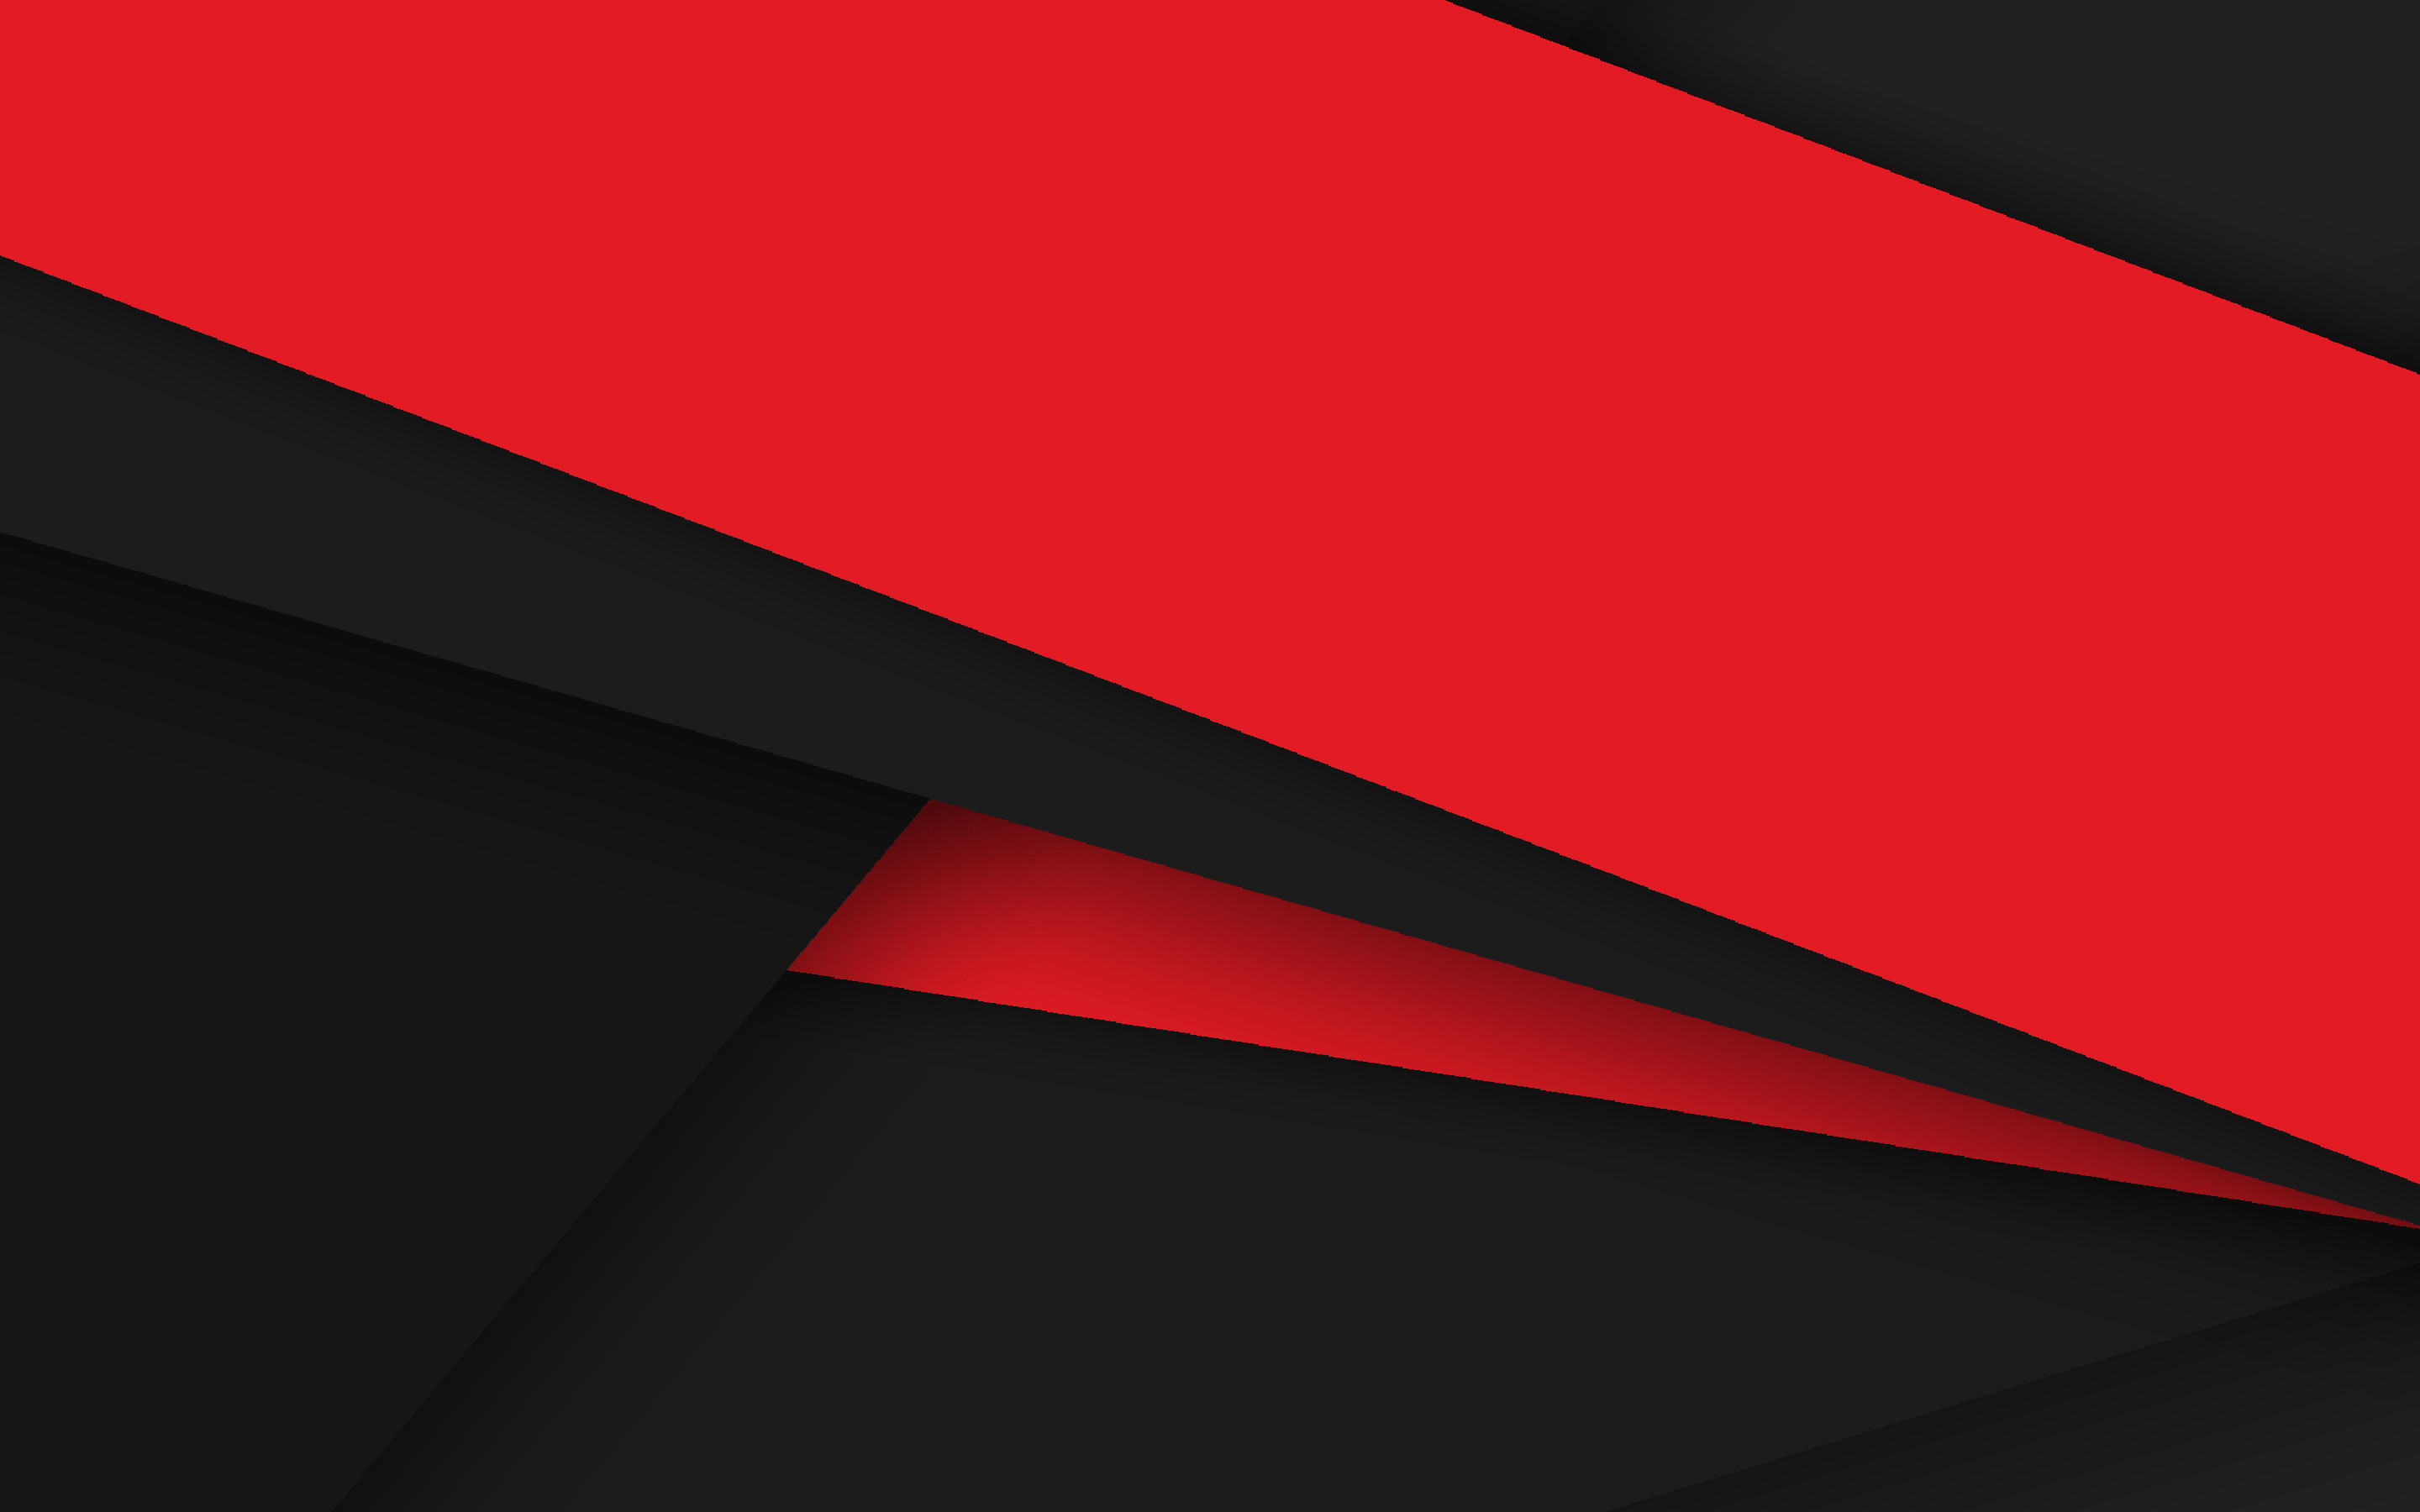 2880x1800, Material Design, Art, Red And Black, Lines, - Material ...